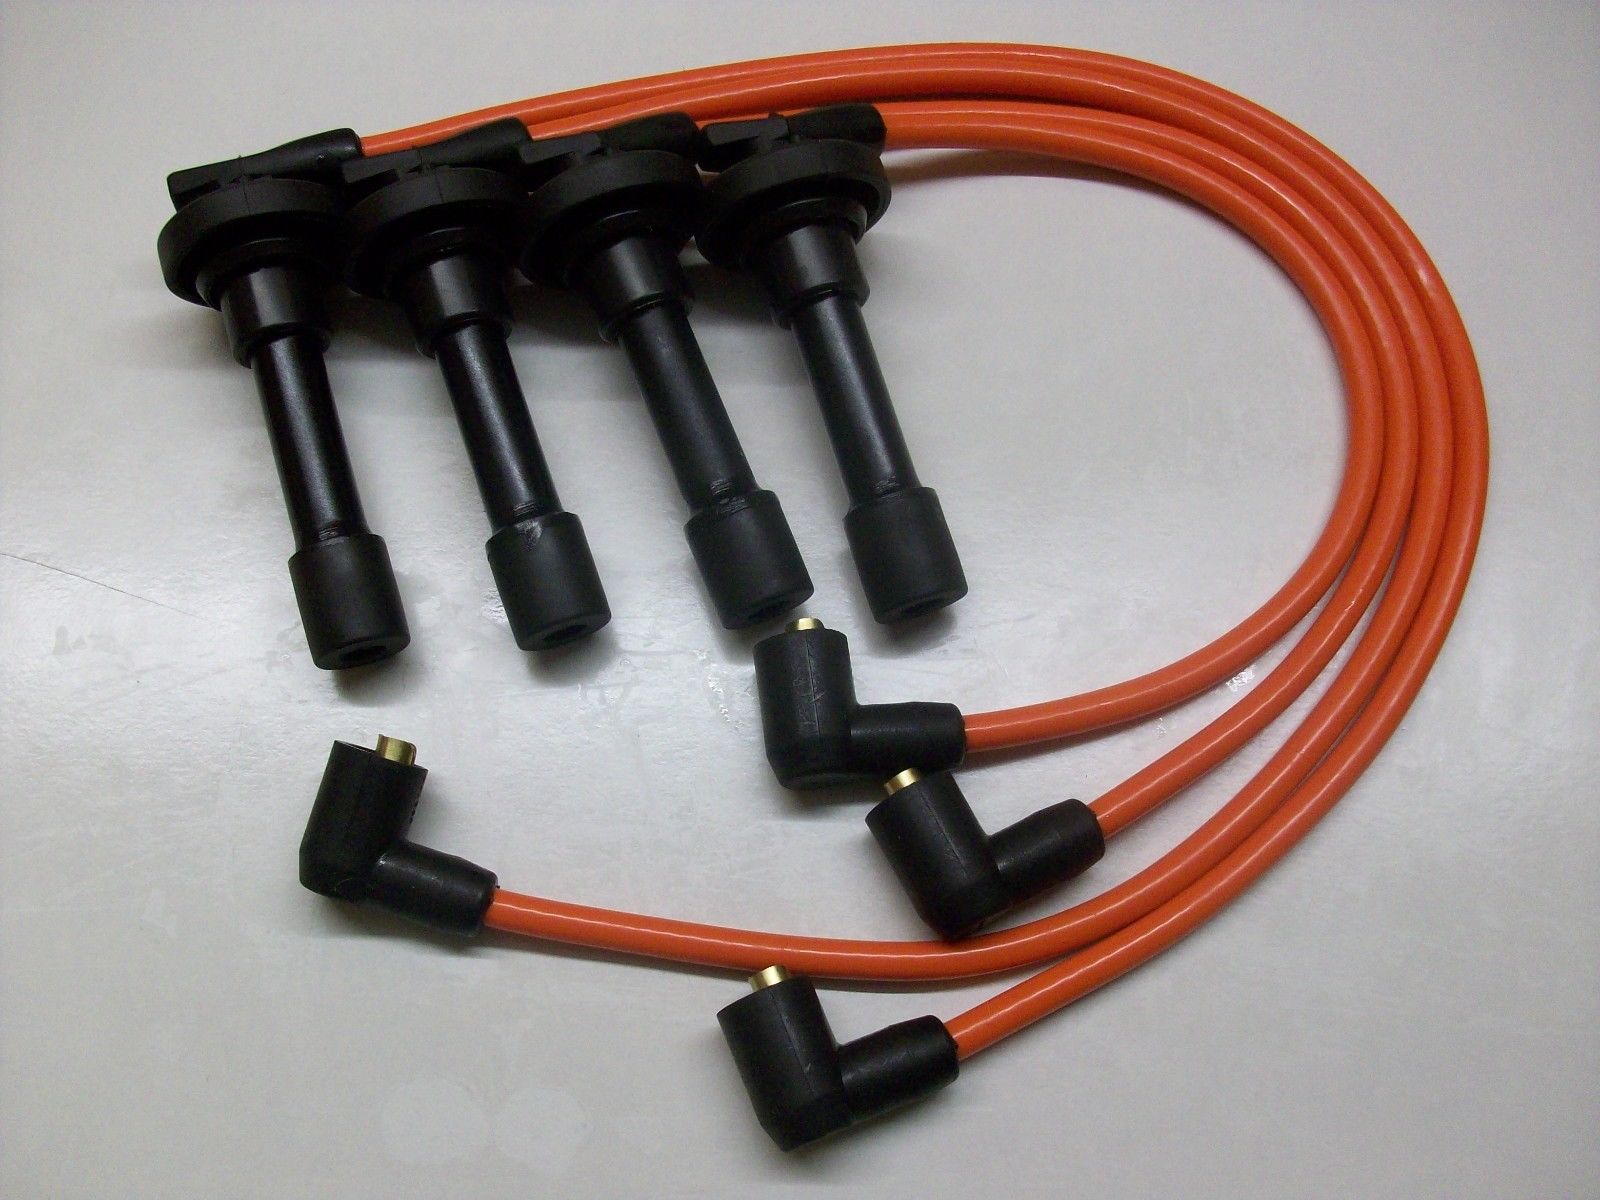 Orange 8mm Performance Ignition Leads Will Fit Honda Civic D16 Dohc Engines Ht.